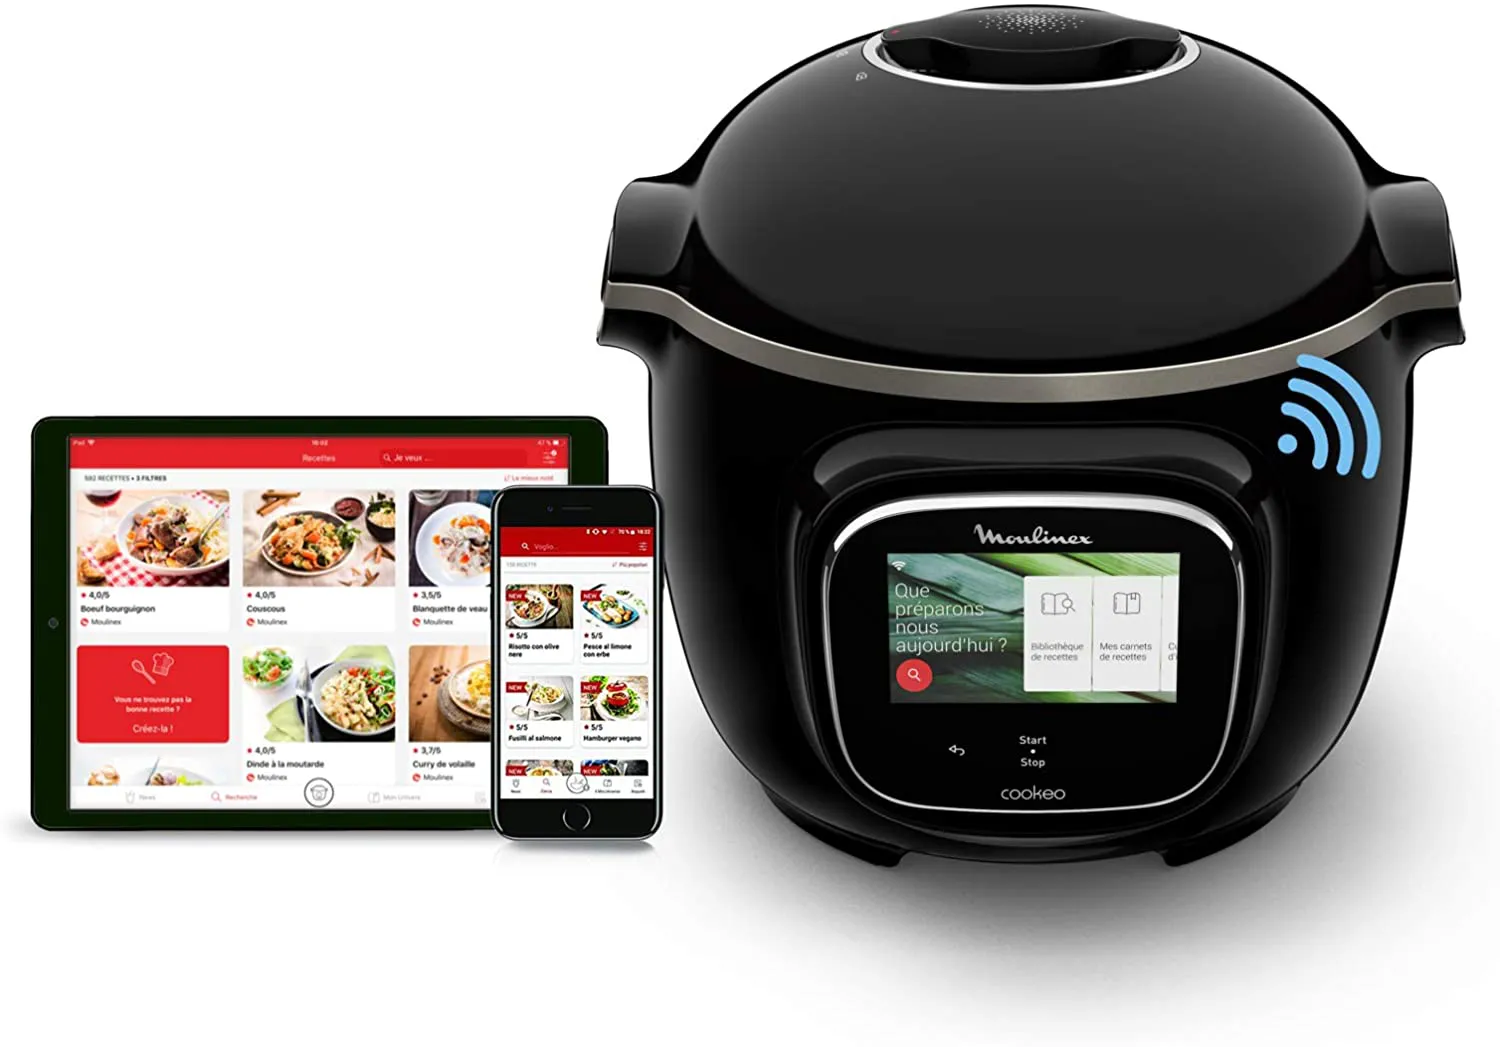 CE902800 Multicuisseur smart Moulinex Wifi Cookeo Touch - 4